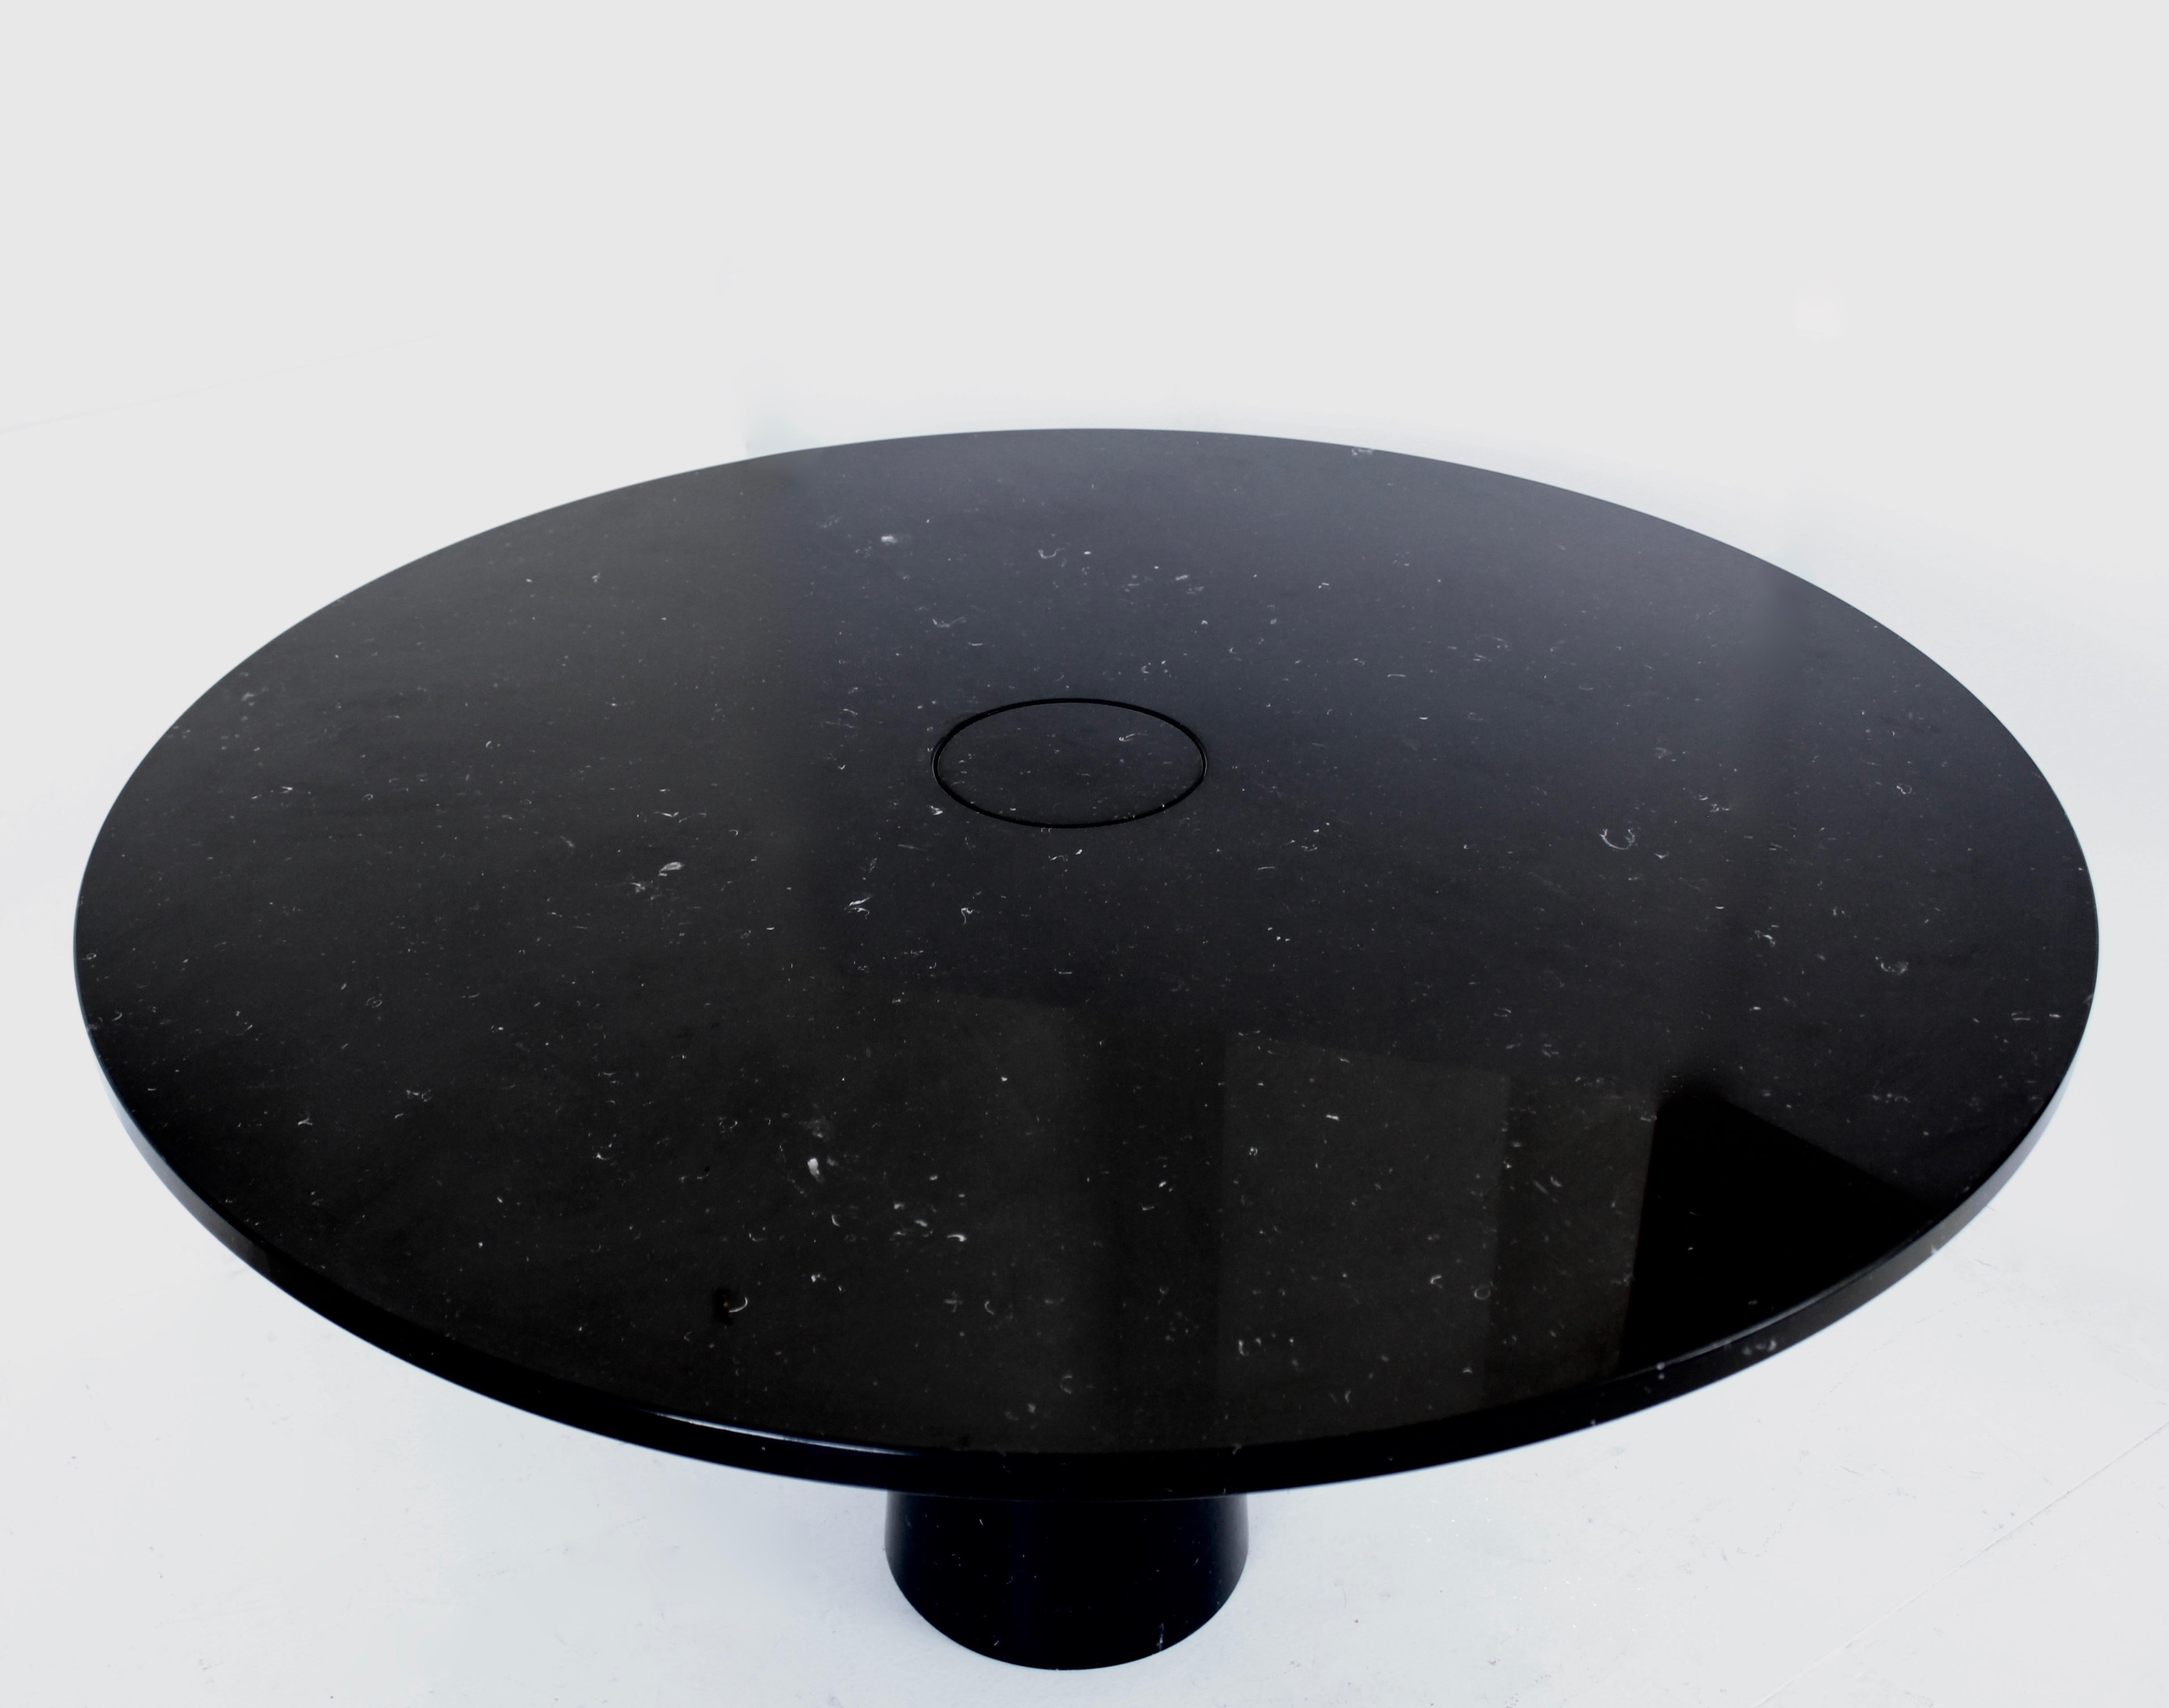 Mid-Century Modern Angelo Mangiarotti Eros Round Dining Table in Black Marquina Marble for Skipper